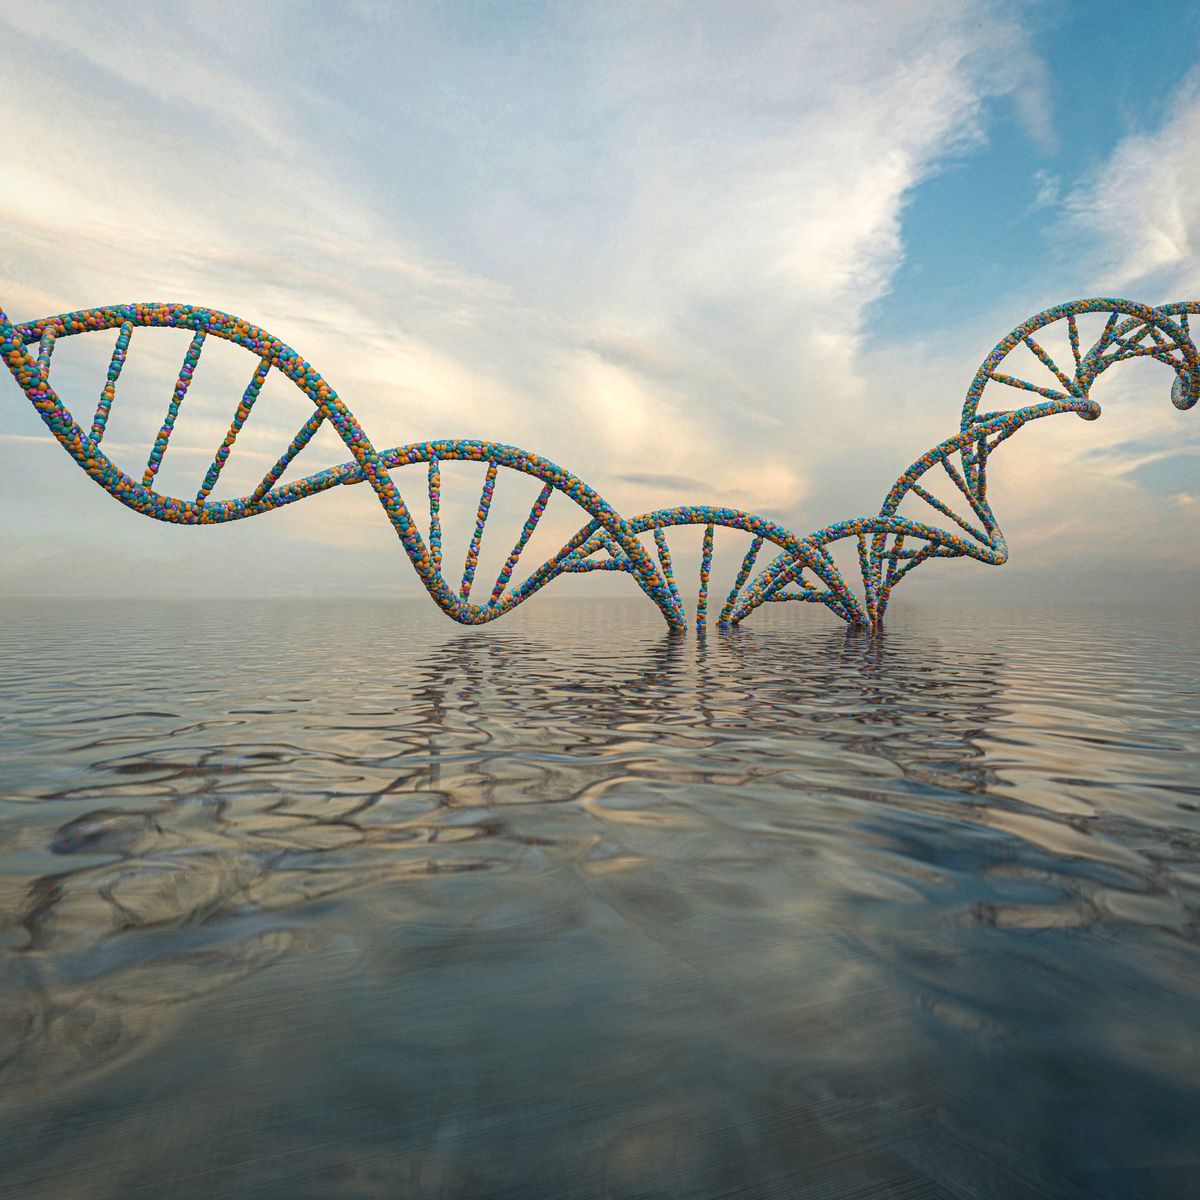 dna rising out of water, illustration